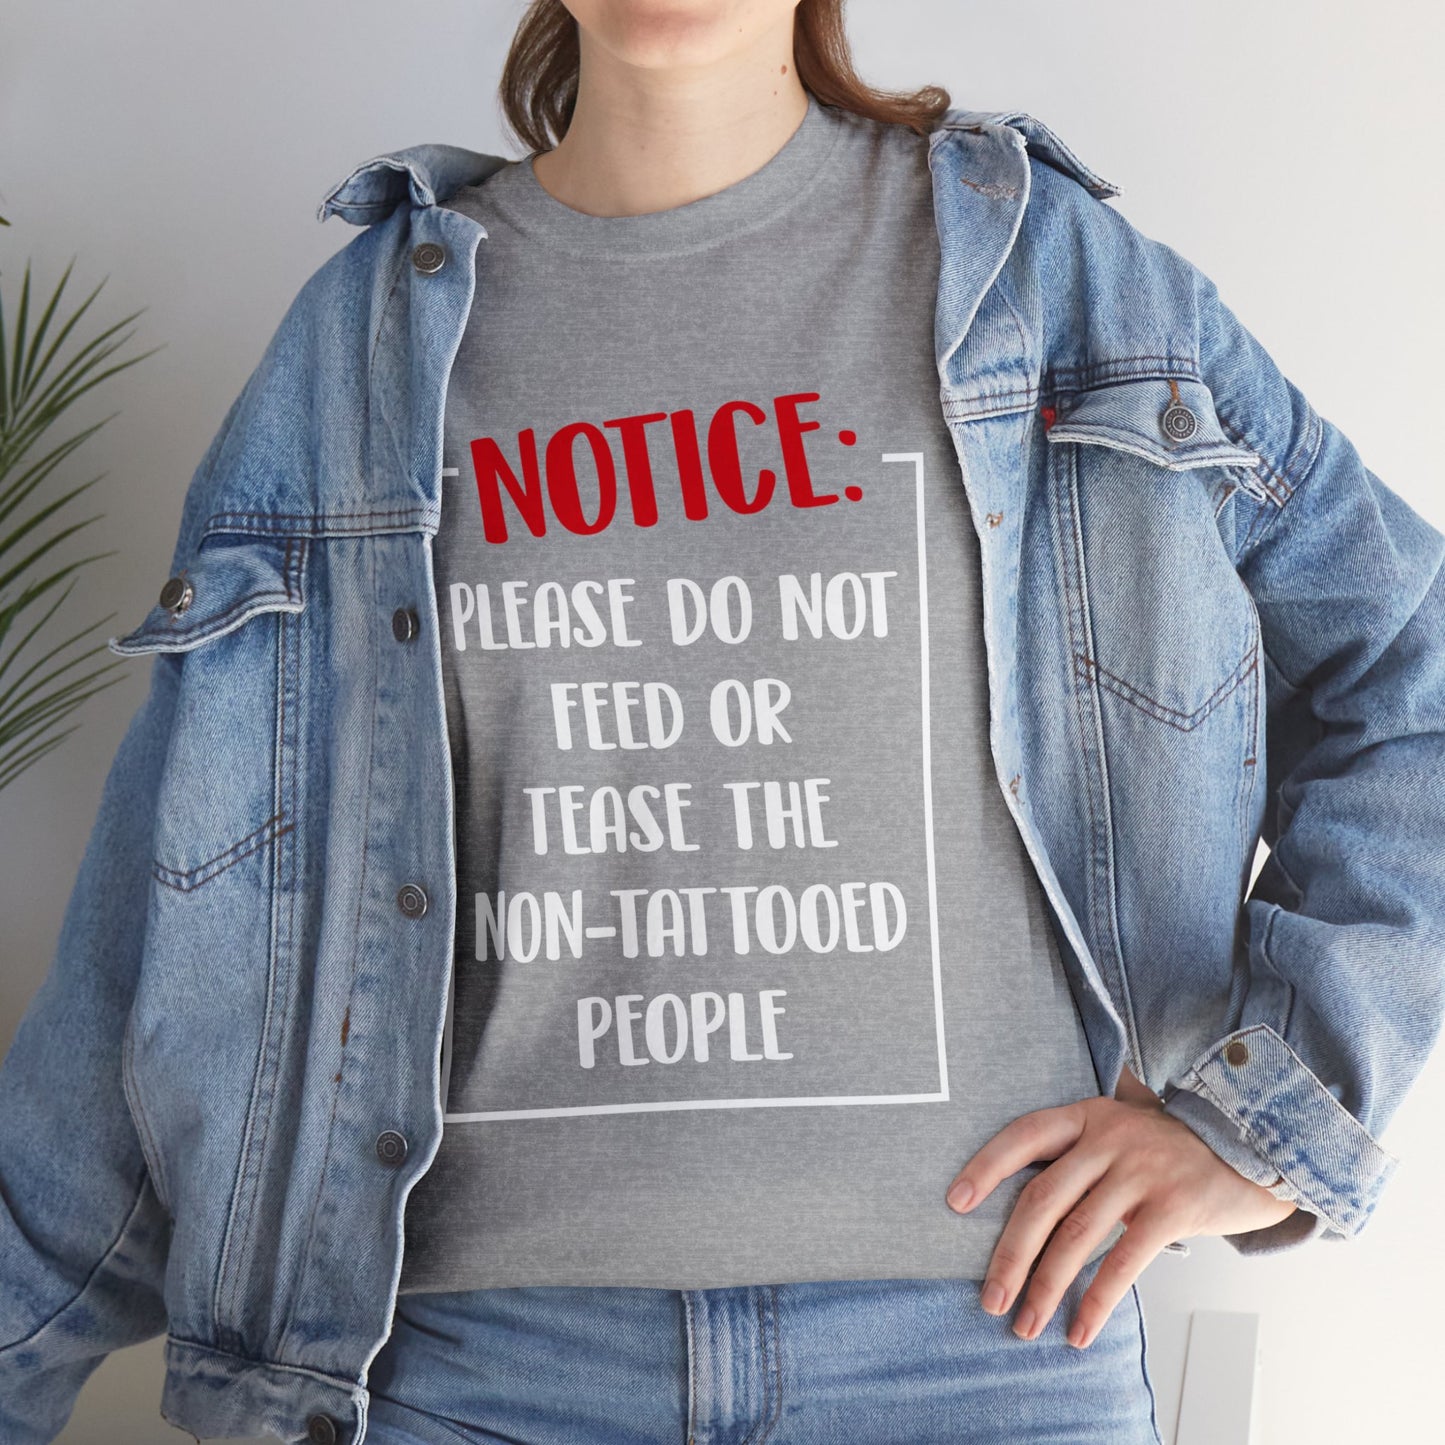 "Do Not Feed Or Tease" Cotton Tee